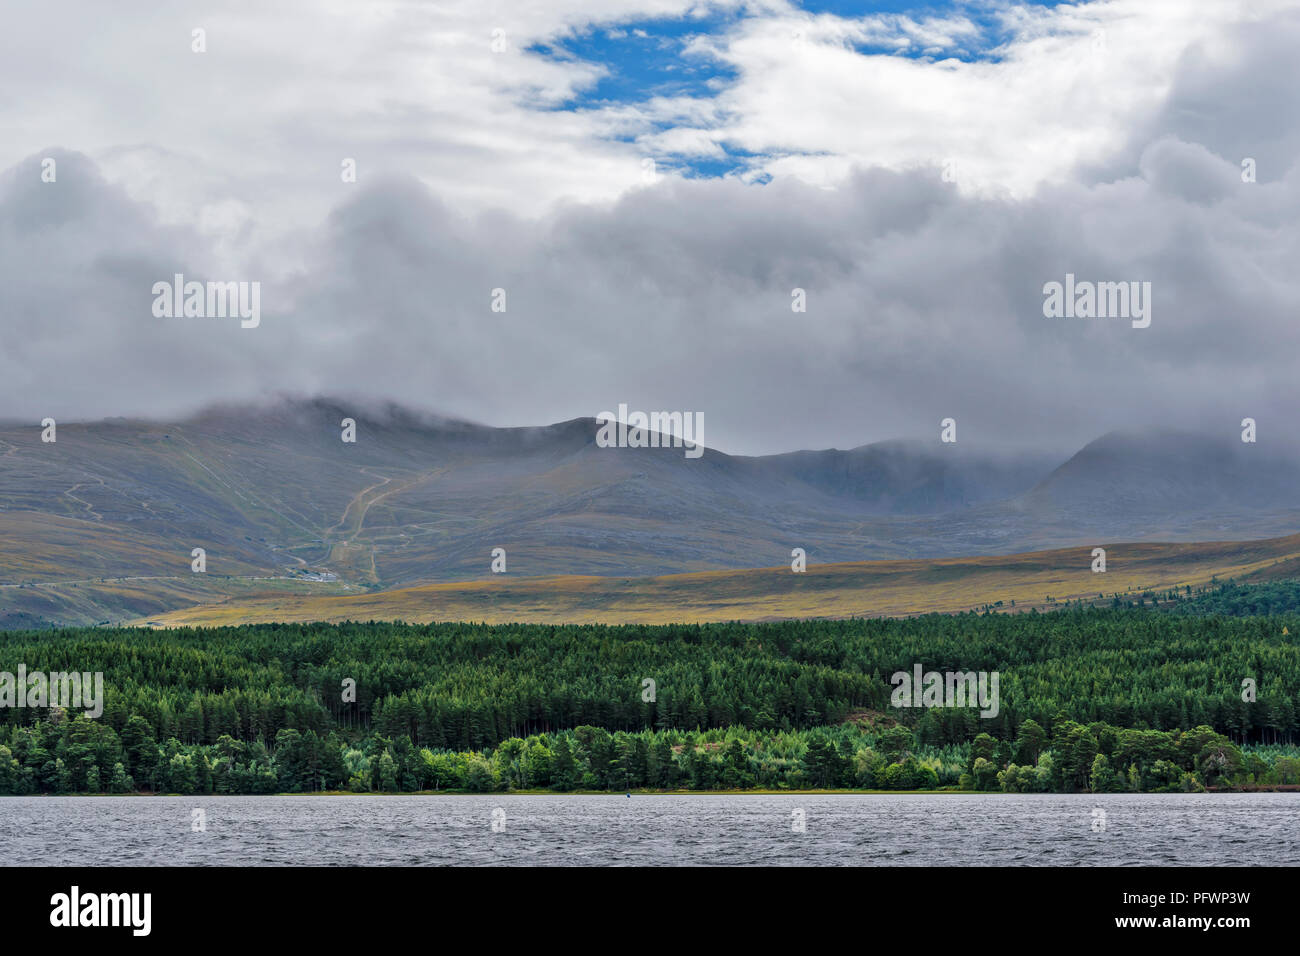 LOCH MORLICH NEAR AVIEMORE SCOTLAND LARGE RAIN CLOUDS OVER THE NORTHERN CAIRNGORM MOUNTAINS Stock Photo